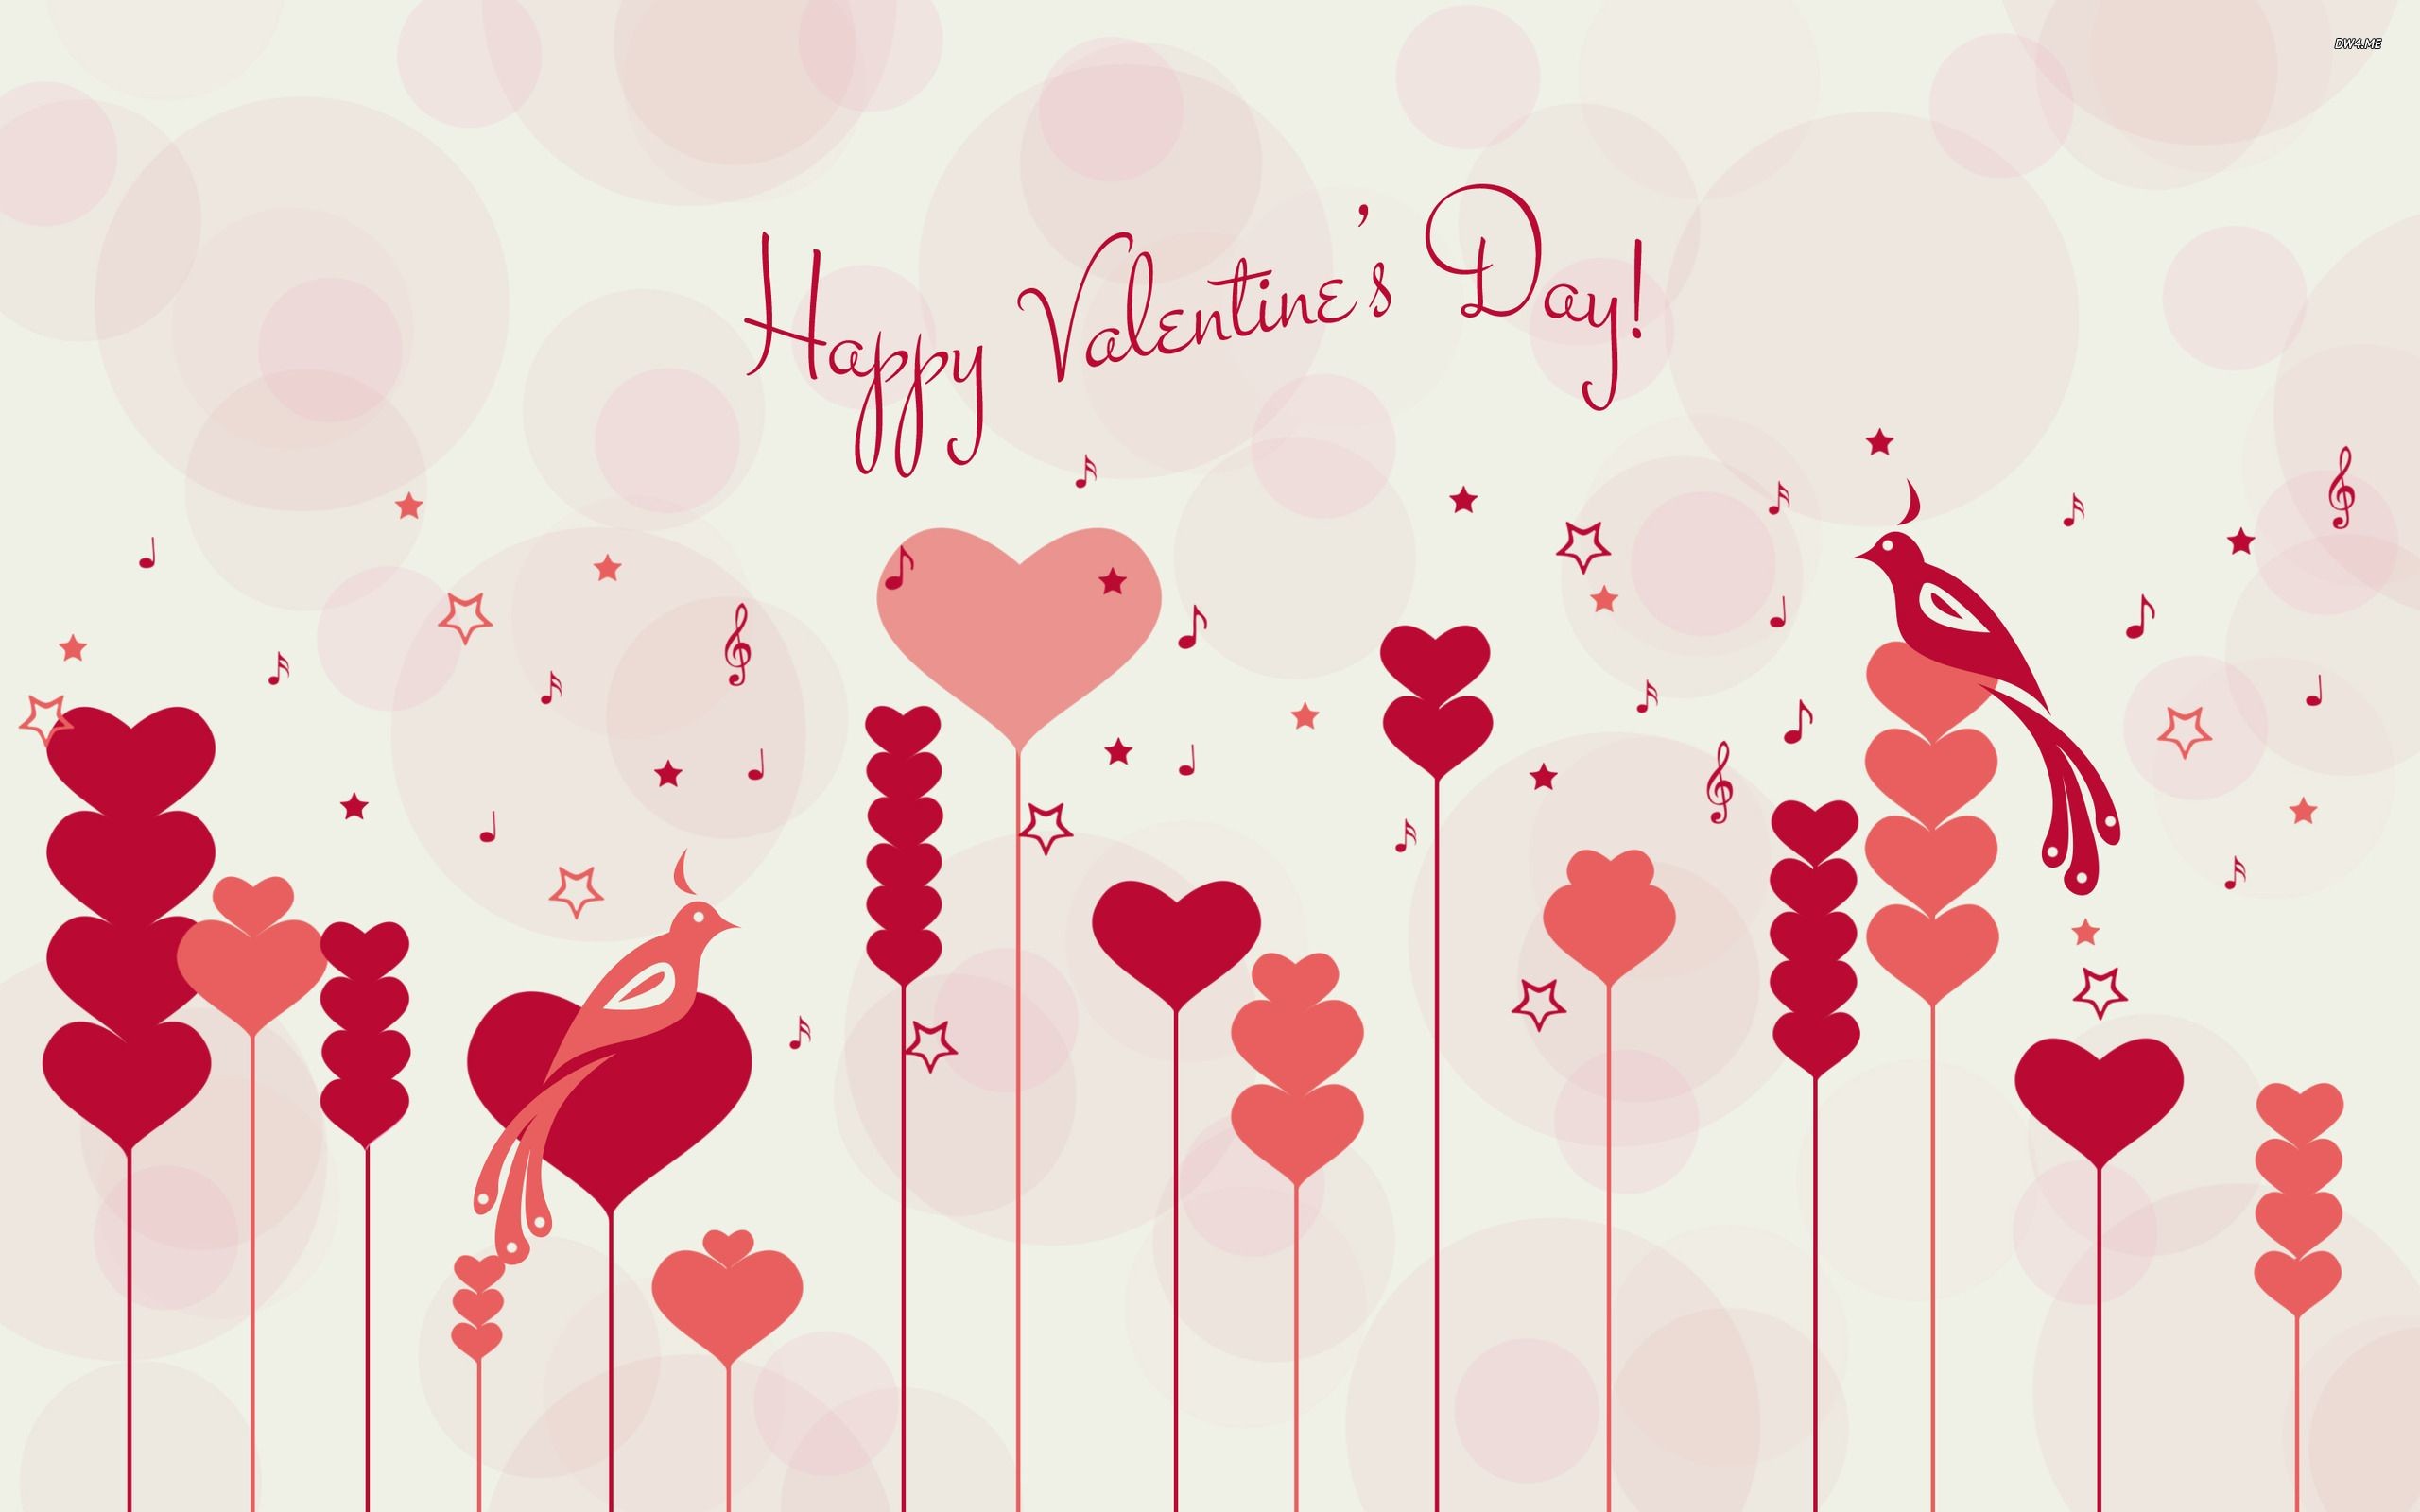 2560x1600 Happy Valentine's Day wallpaper - Holiday wallpapers - #1188